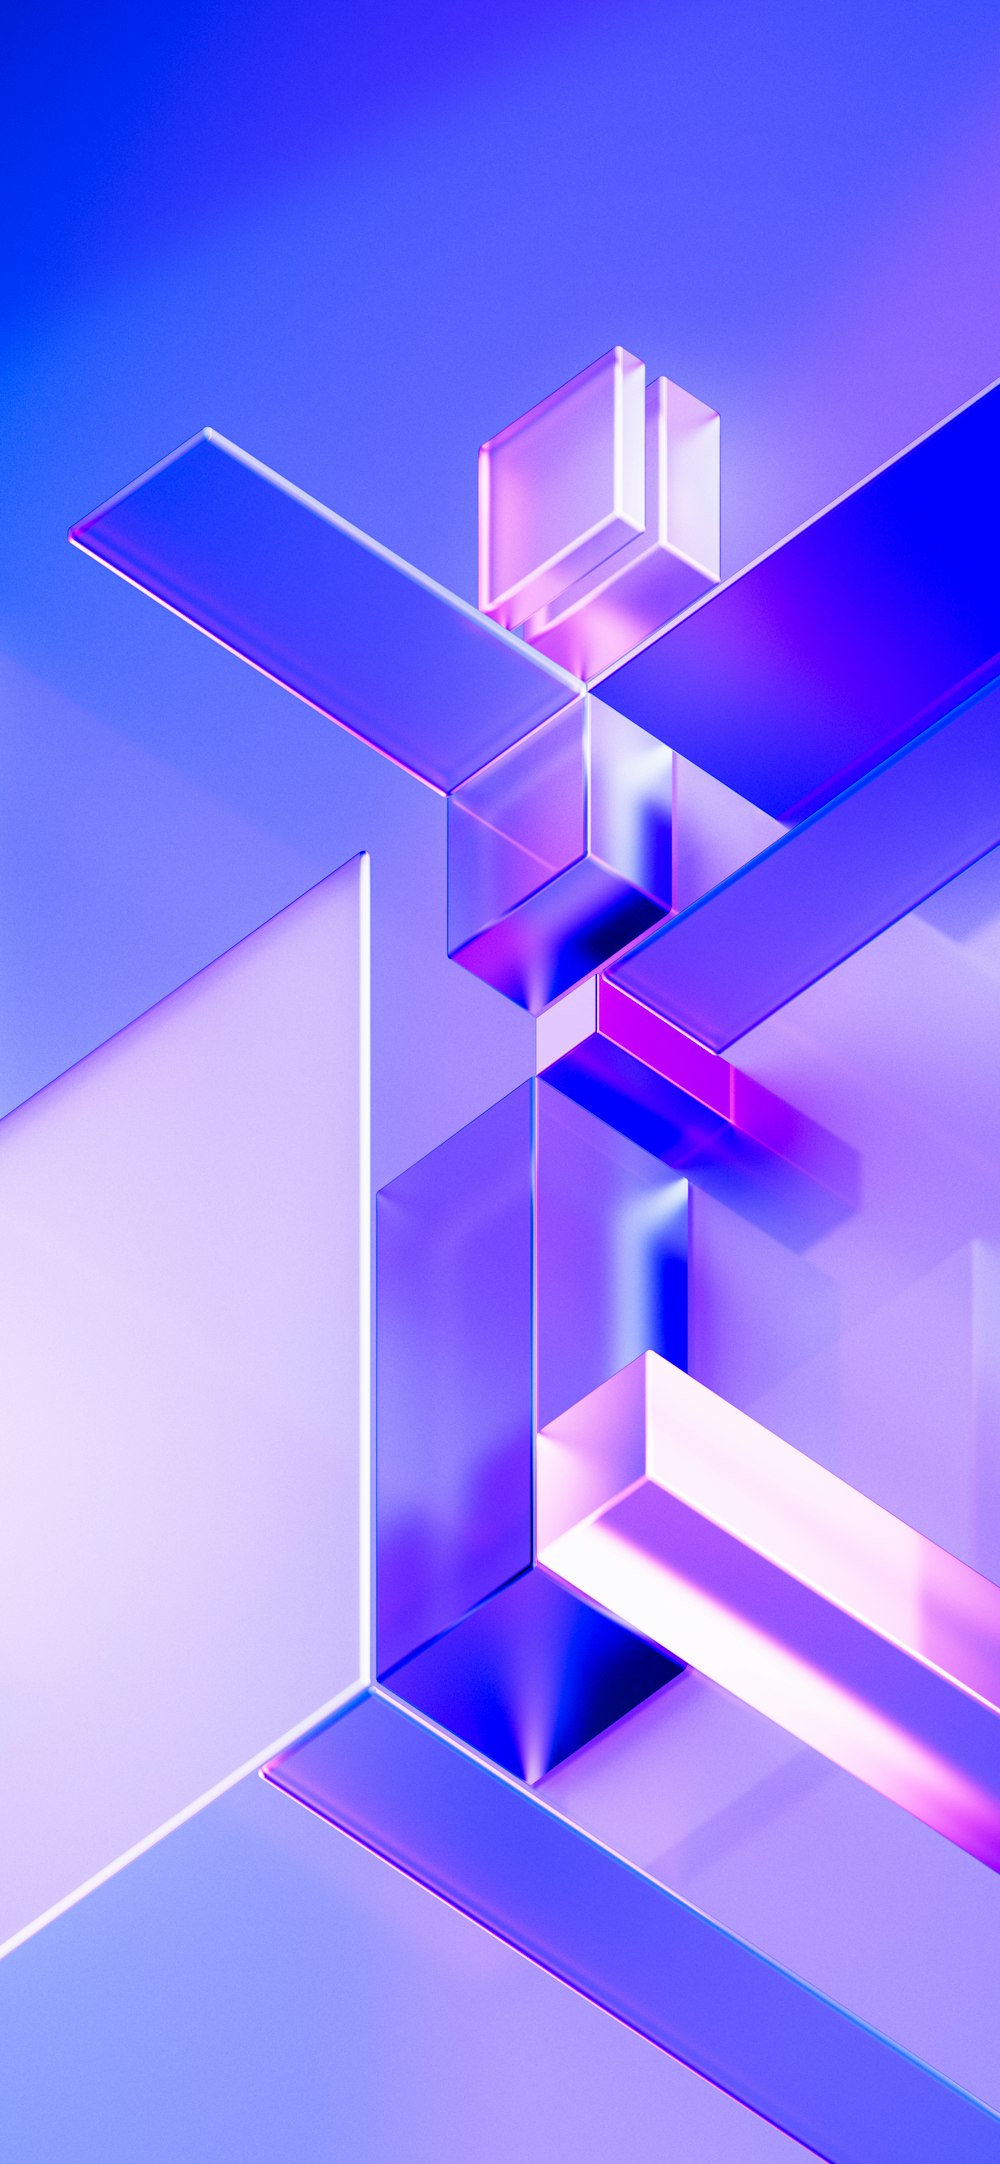 an abstract image of a purple and pink object